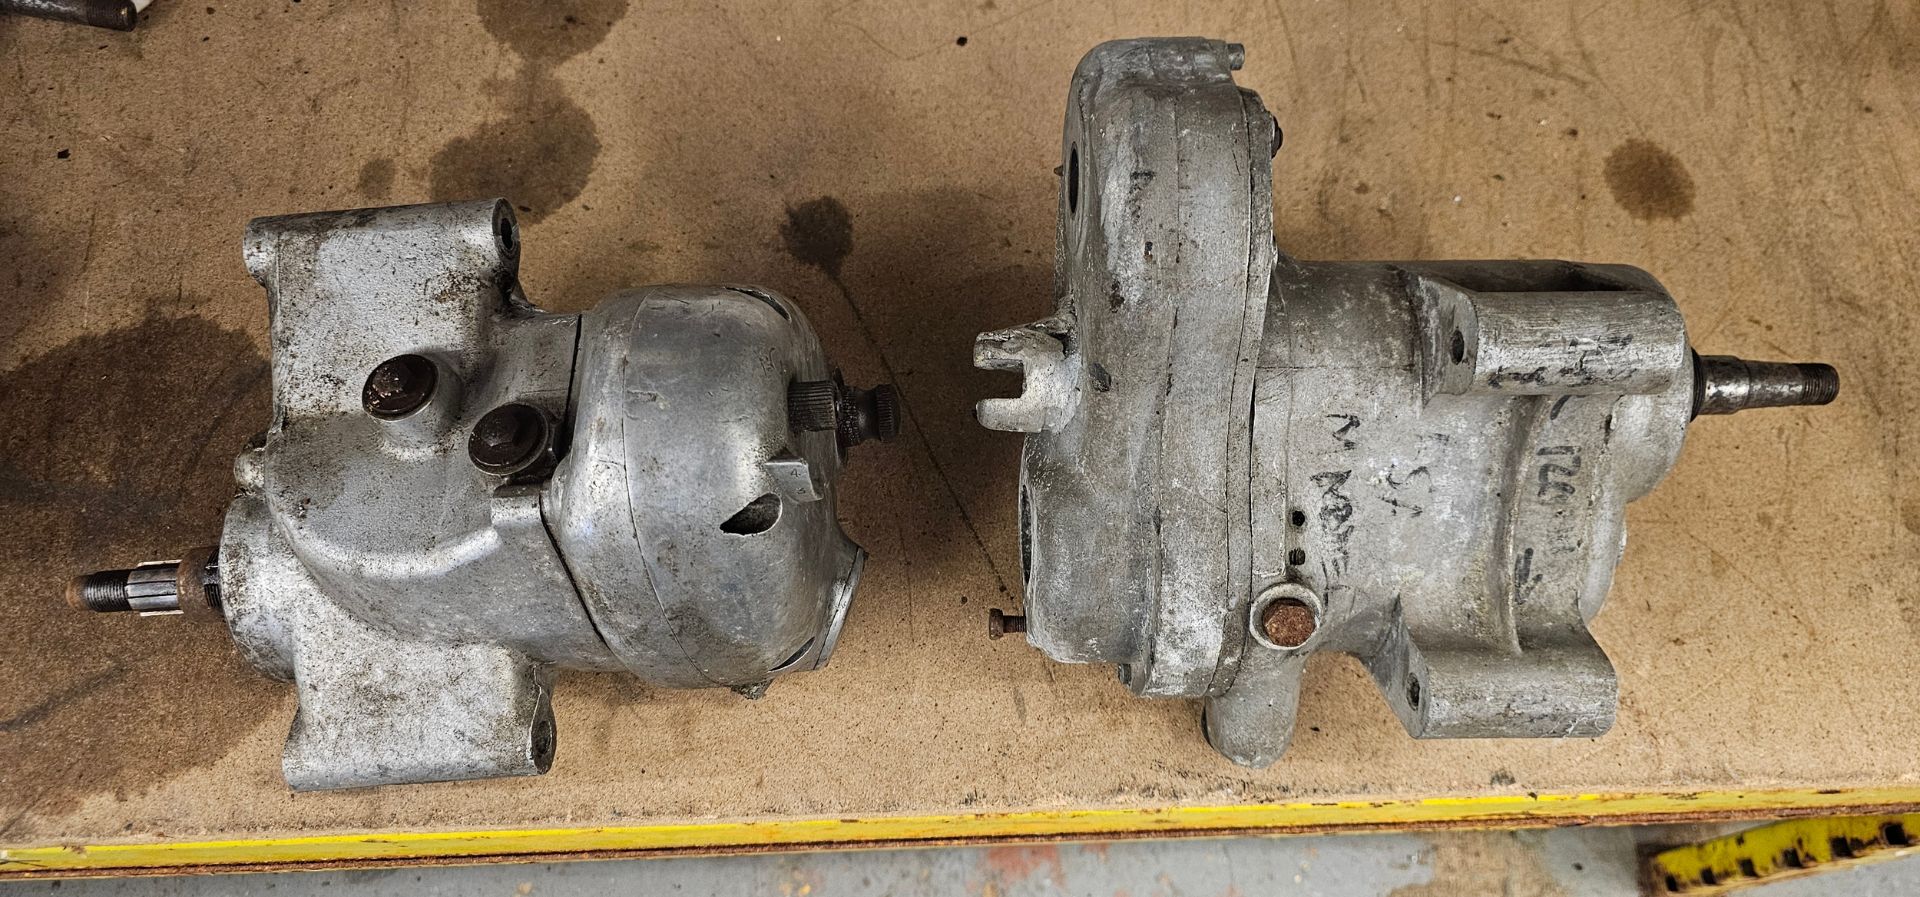 A BSA gearbox and another gearbox